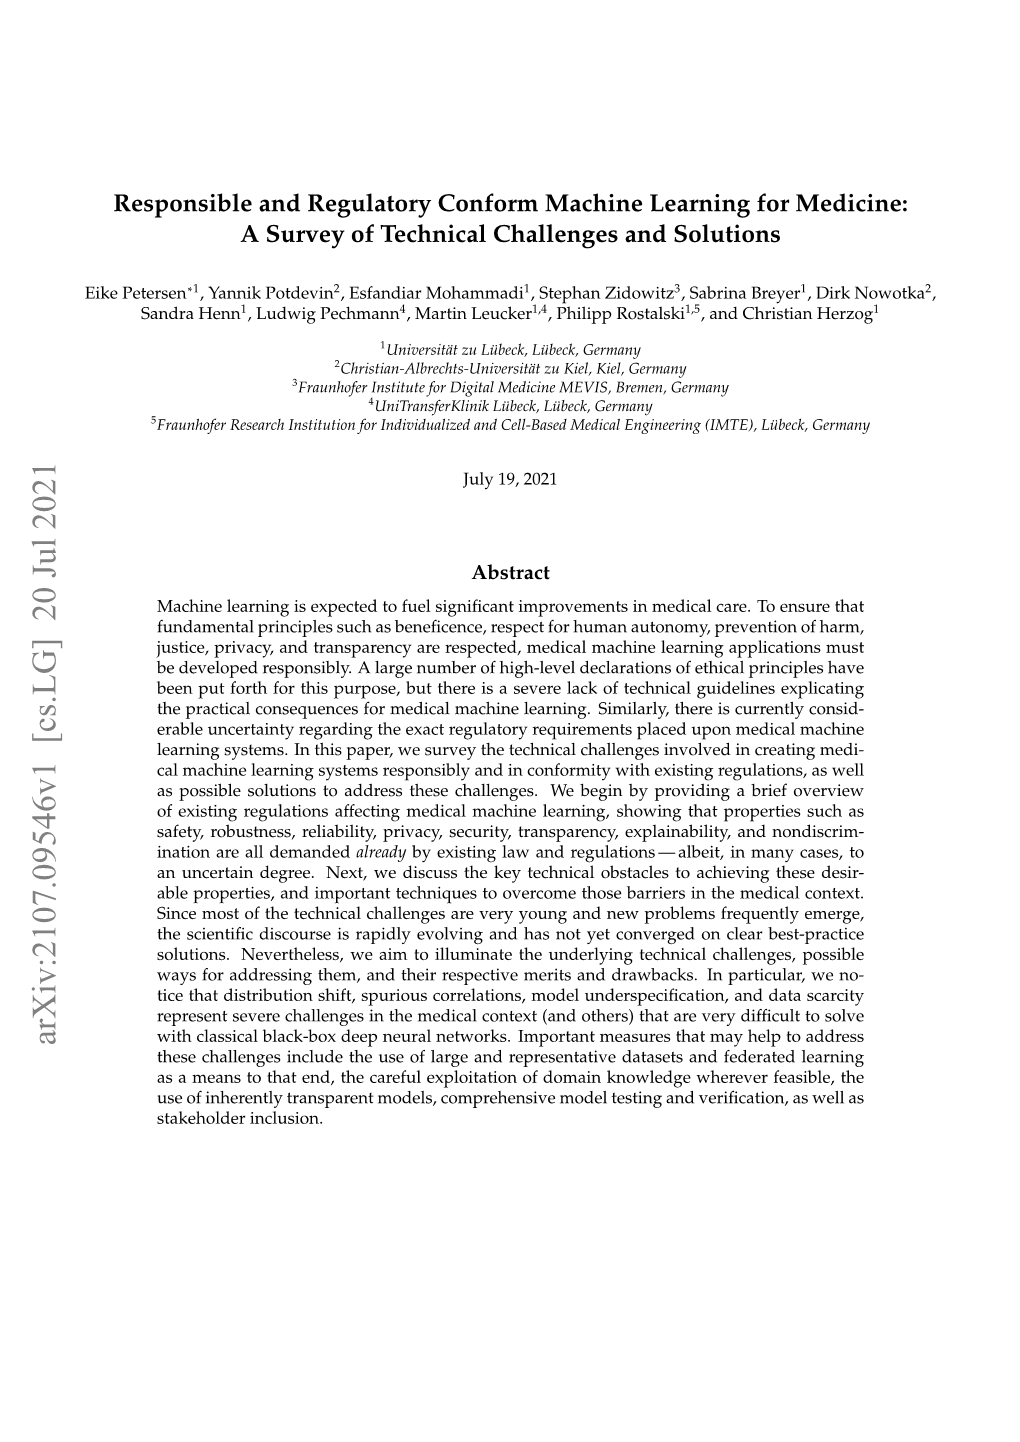 Responsible and Regulatory Conform Machine Learning for Medicine: a Survey of Technical Challenges and Solutions